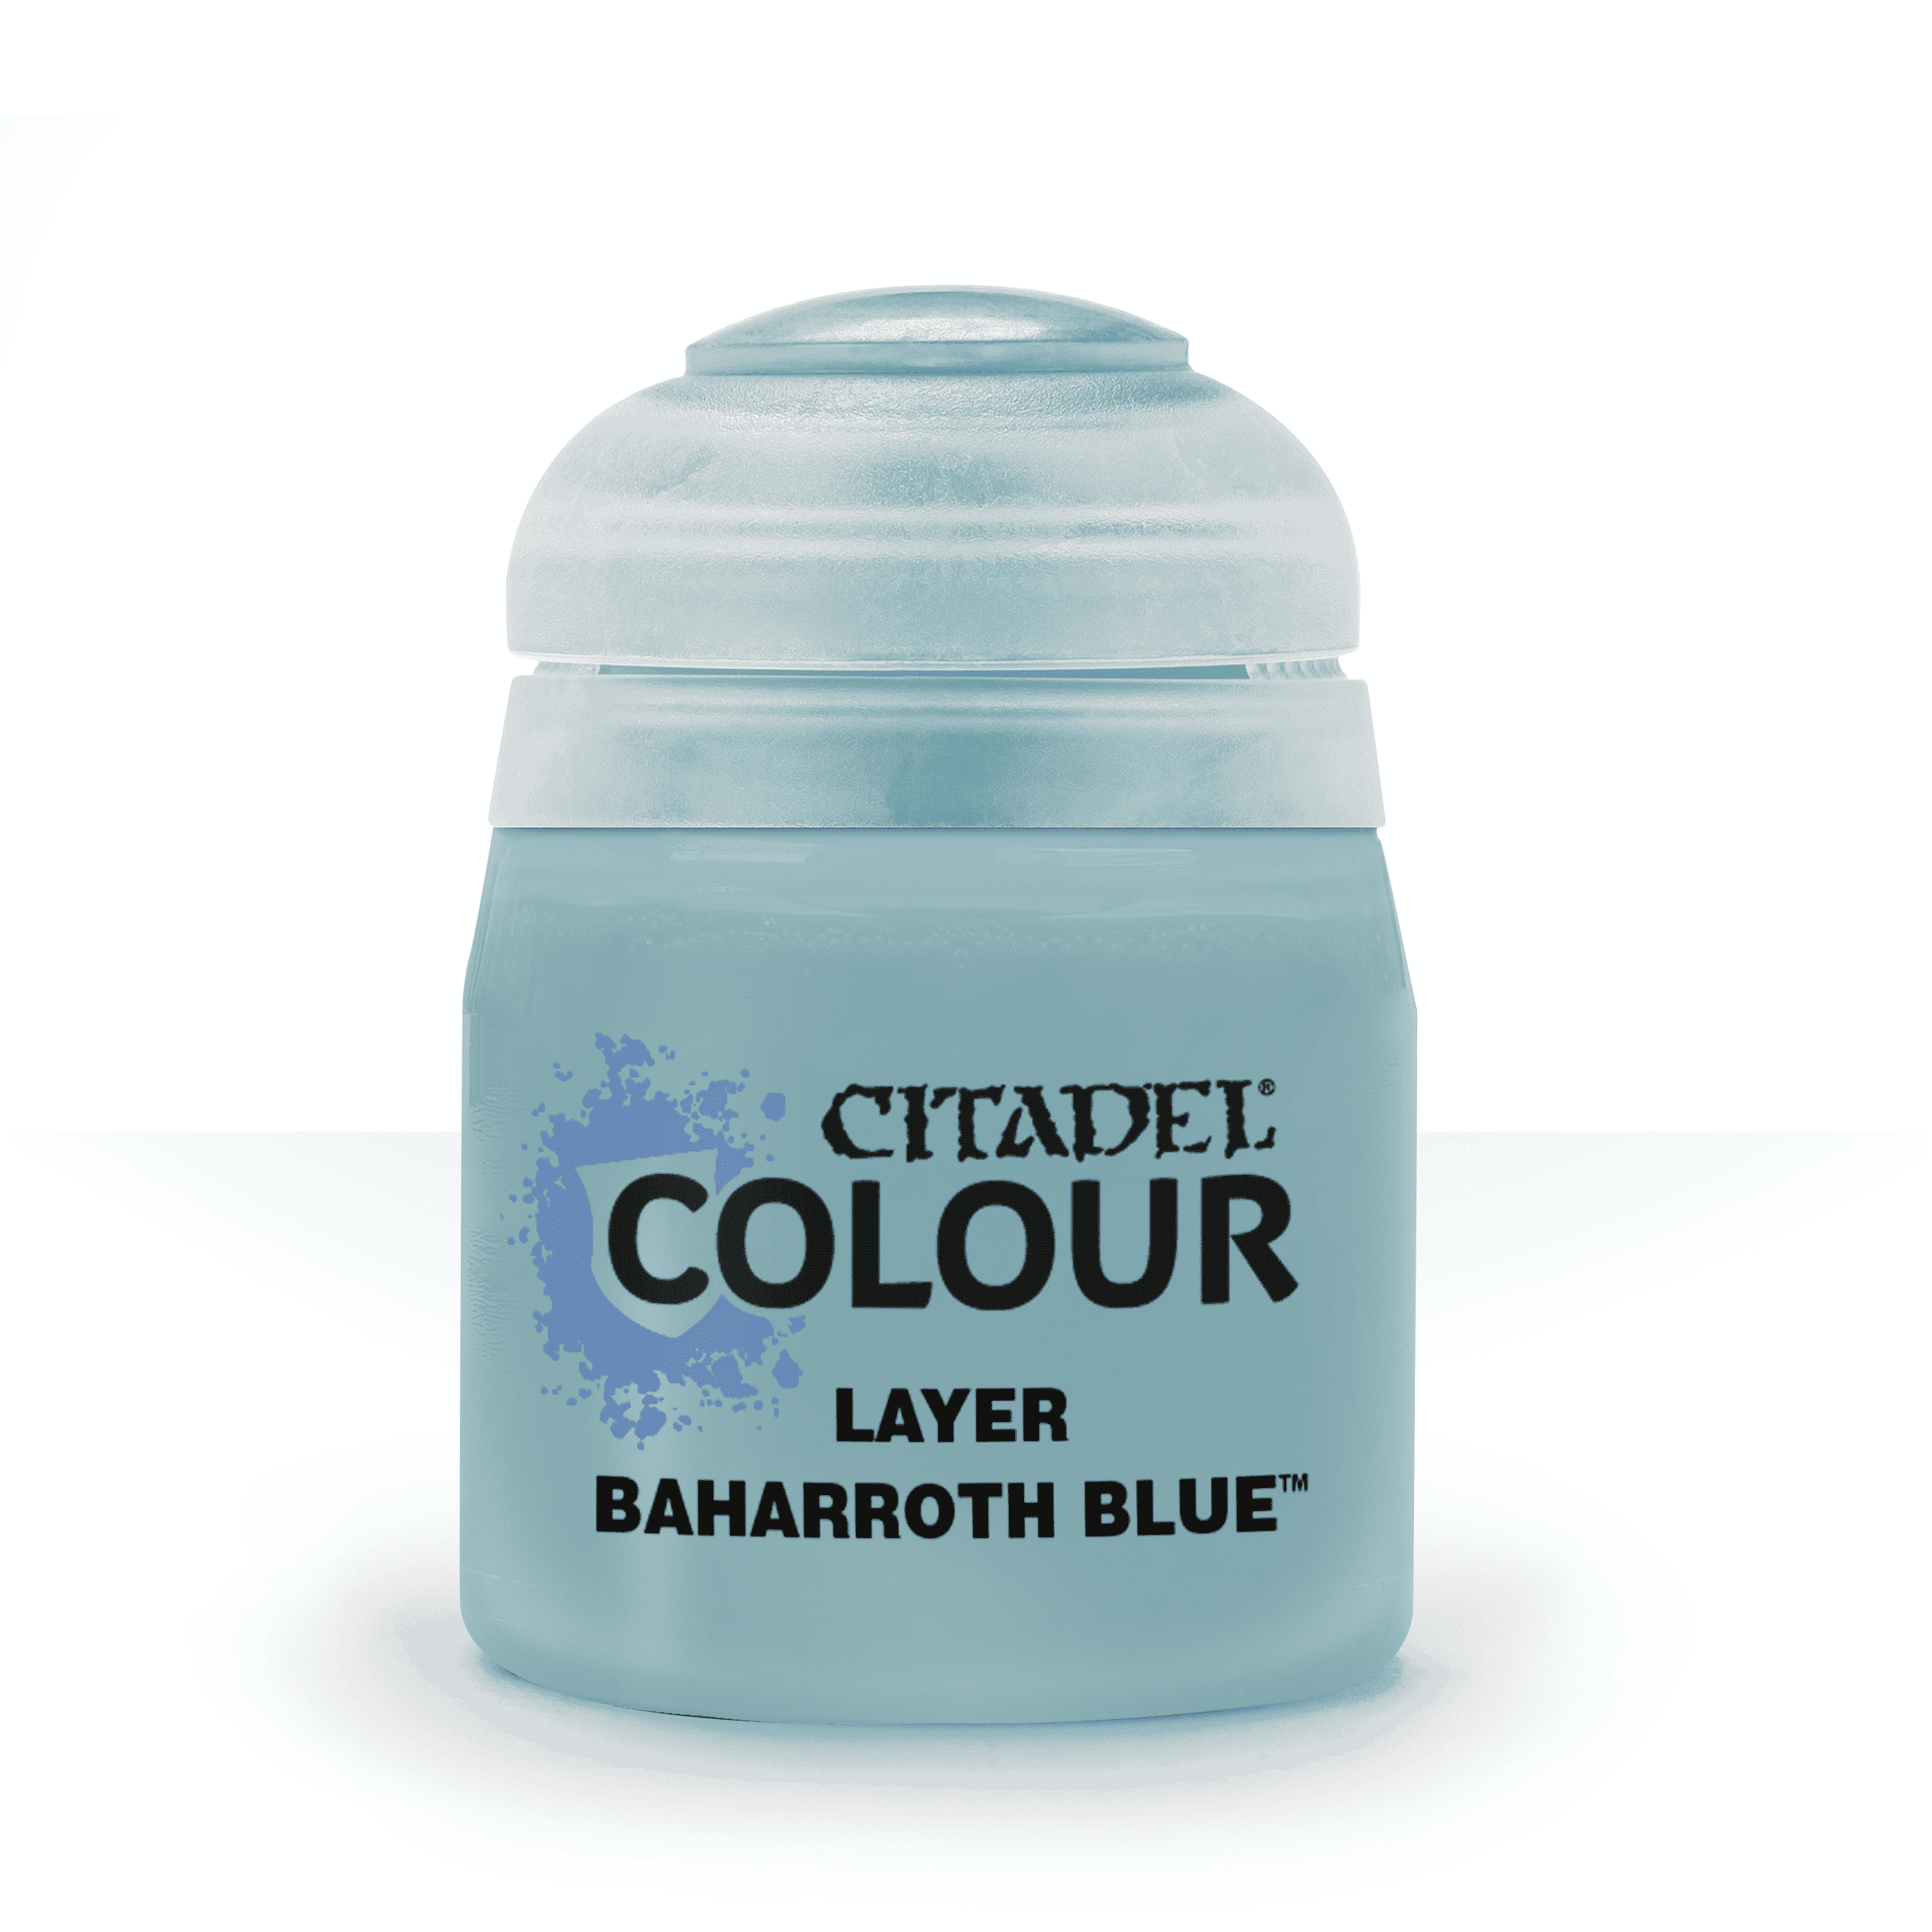 LAYER: BAHARROTH BLUE – Northumbrian Tin Soldier